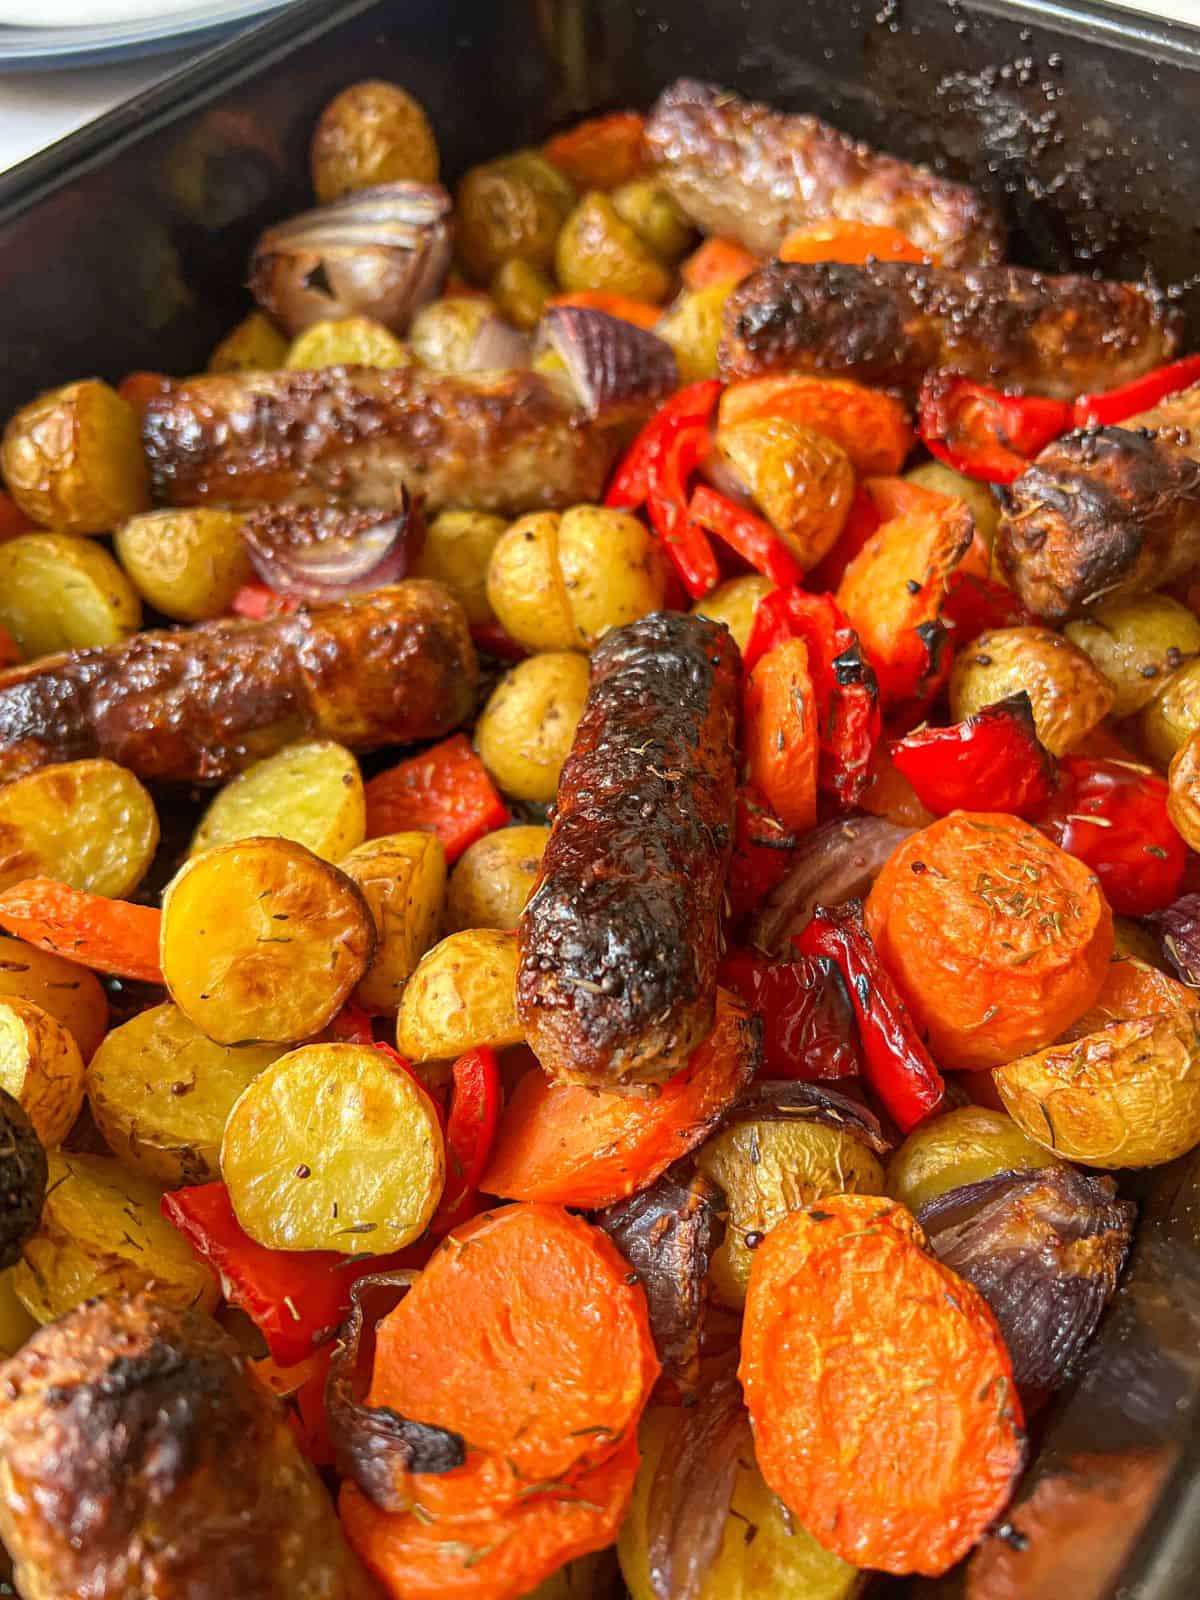 Sausages, roasted potatoes and carrots in a baking dish.